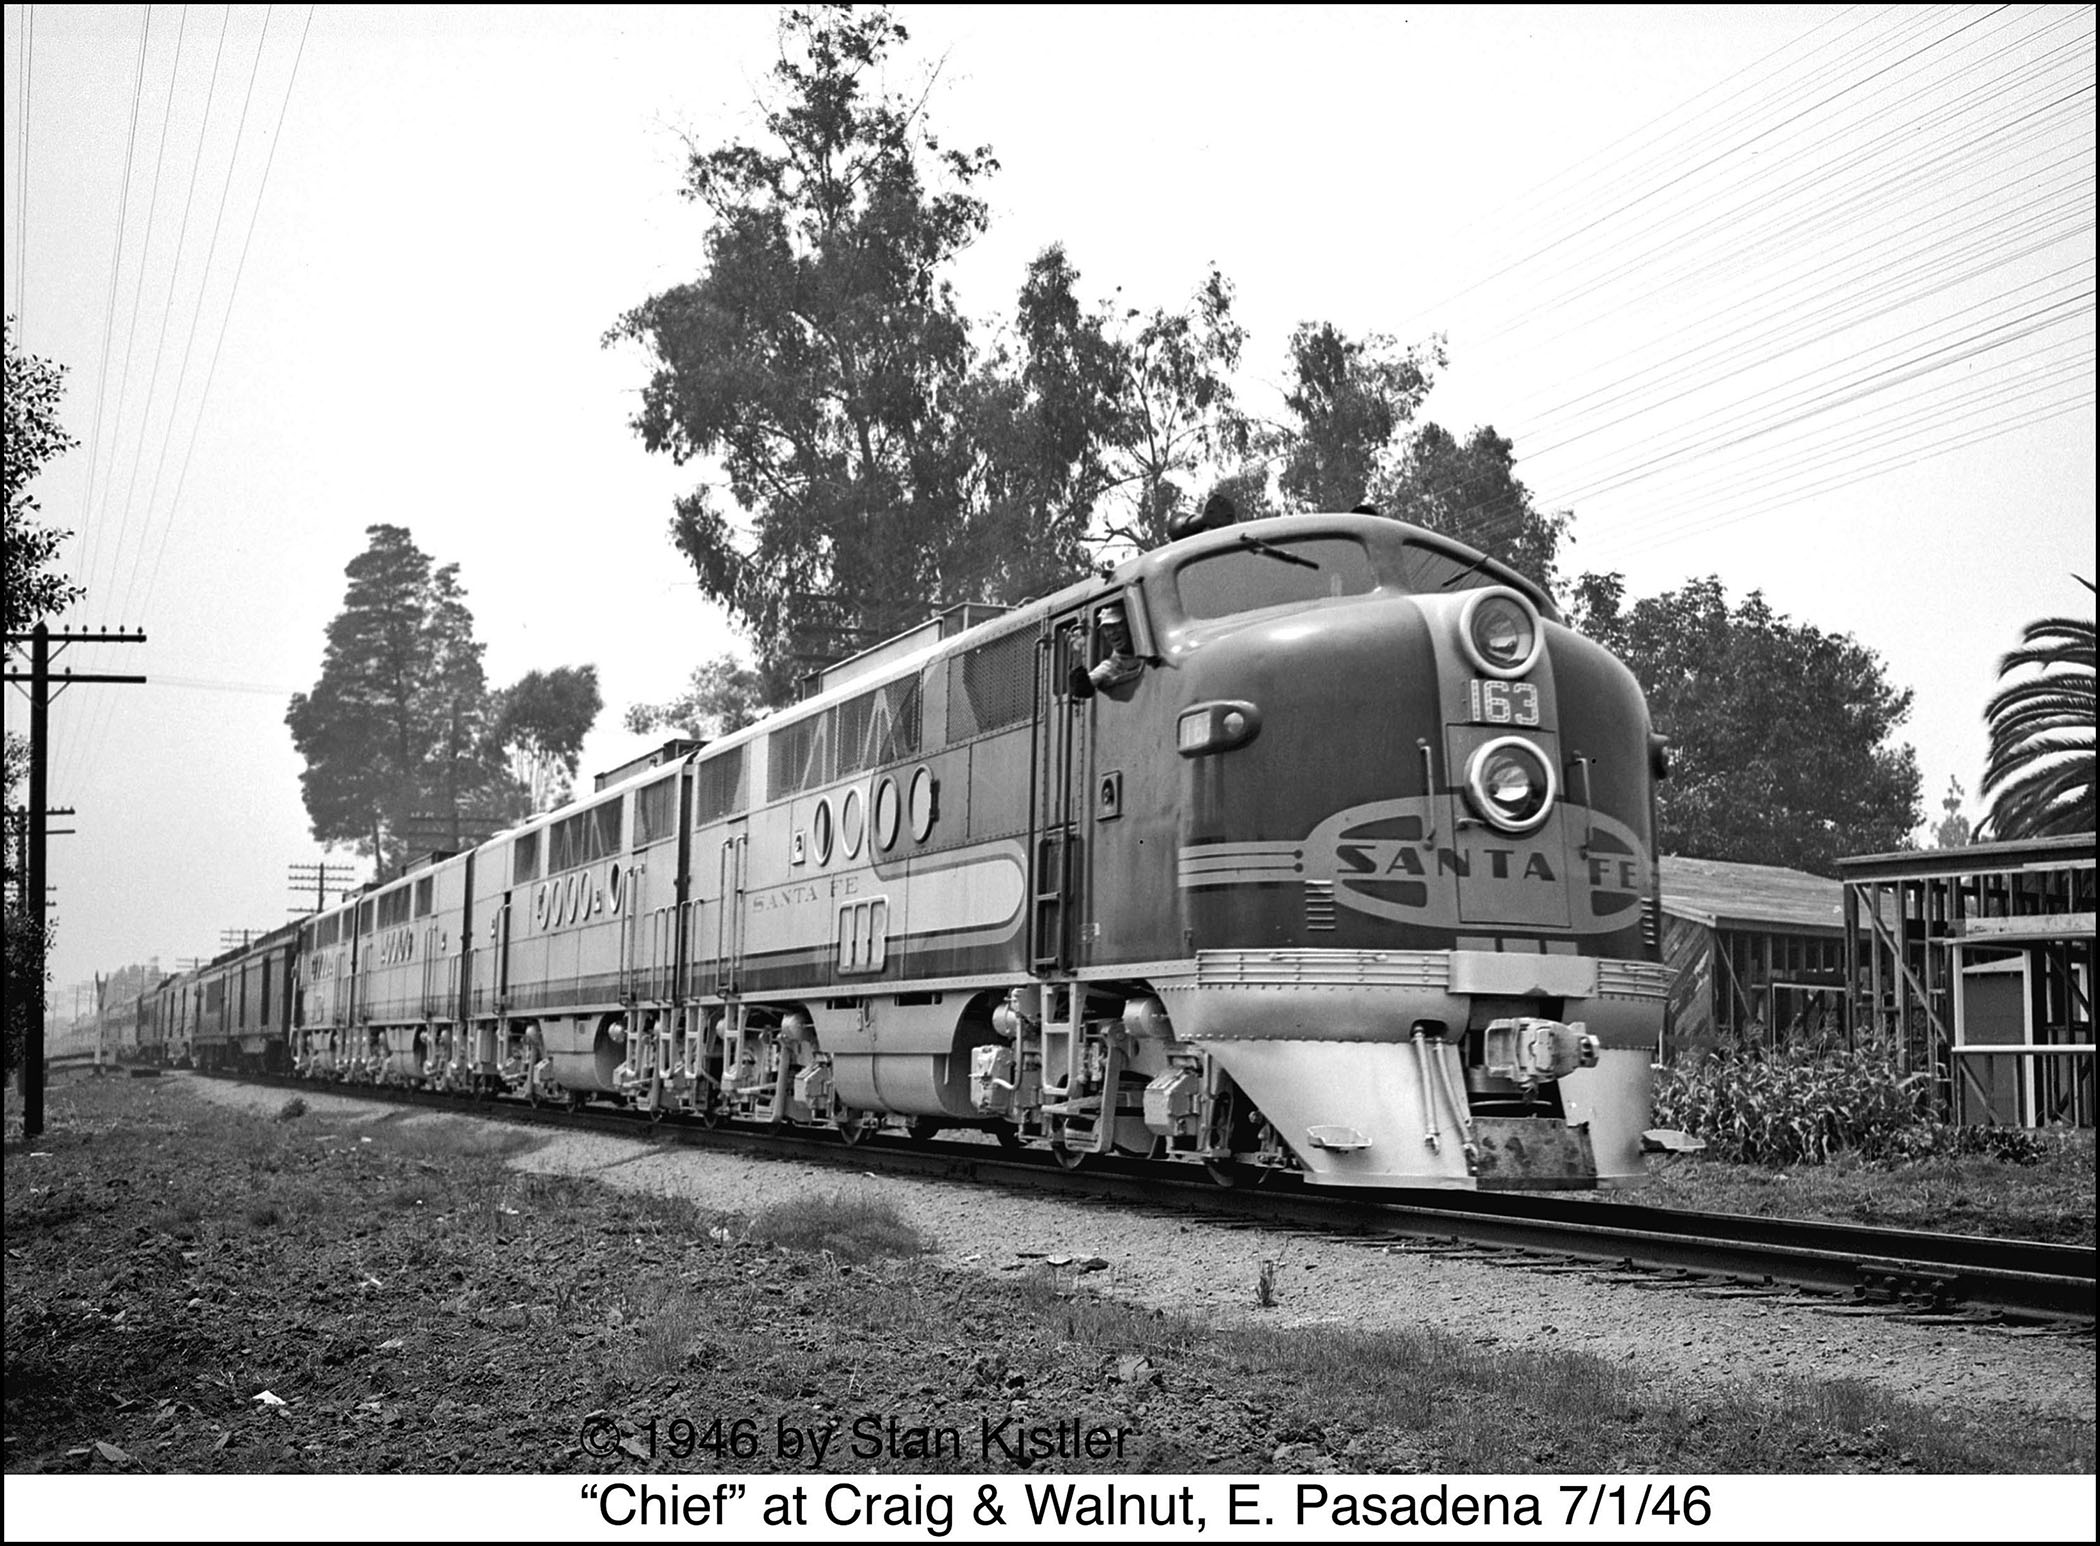 The engineer waves at the camera as the Chief speeds Eastbound through Pasadena on July 1, 1946.